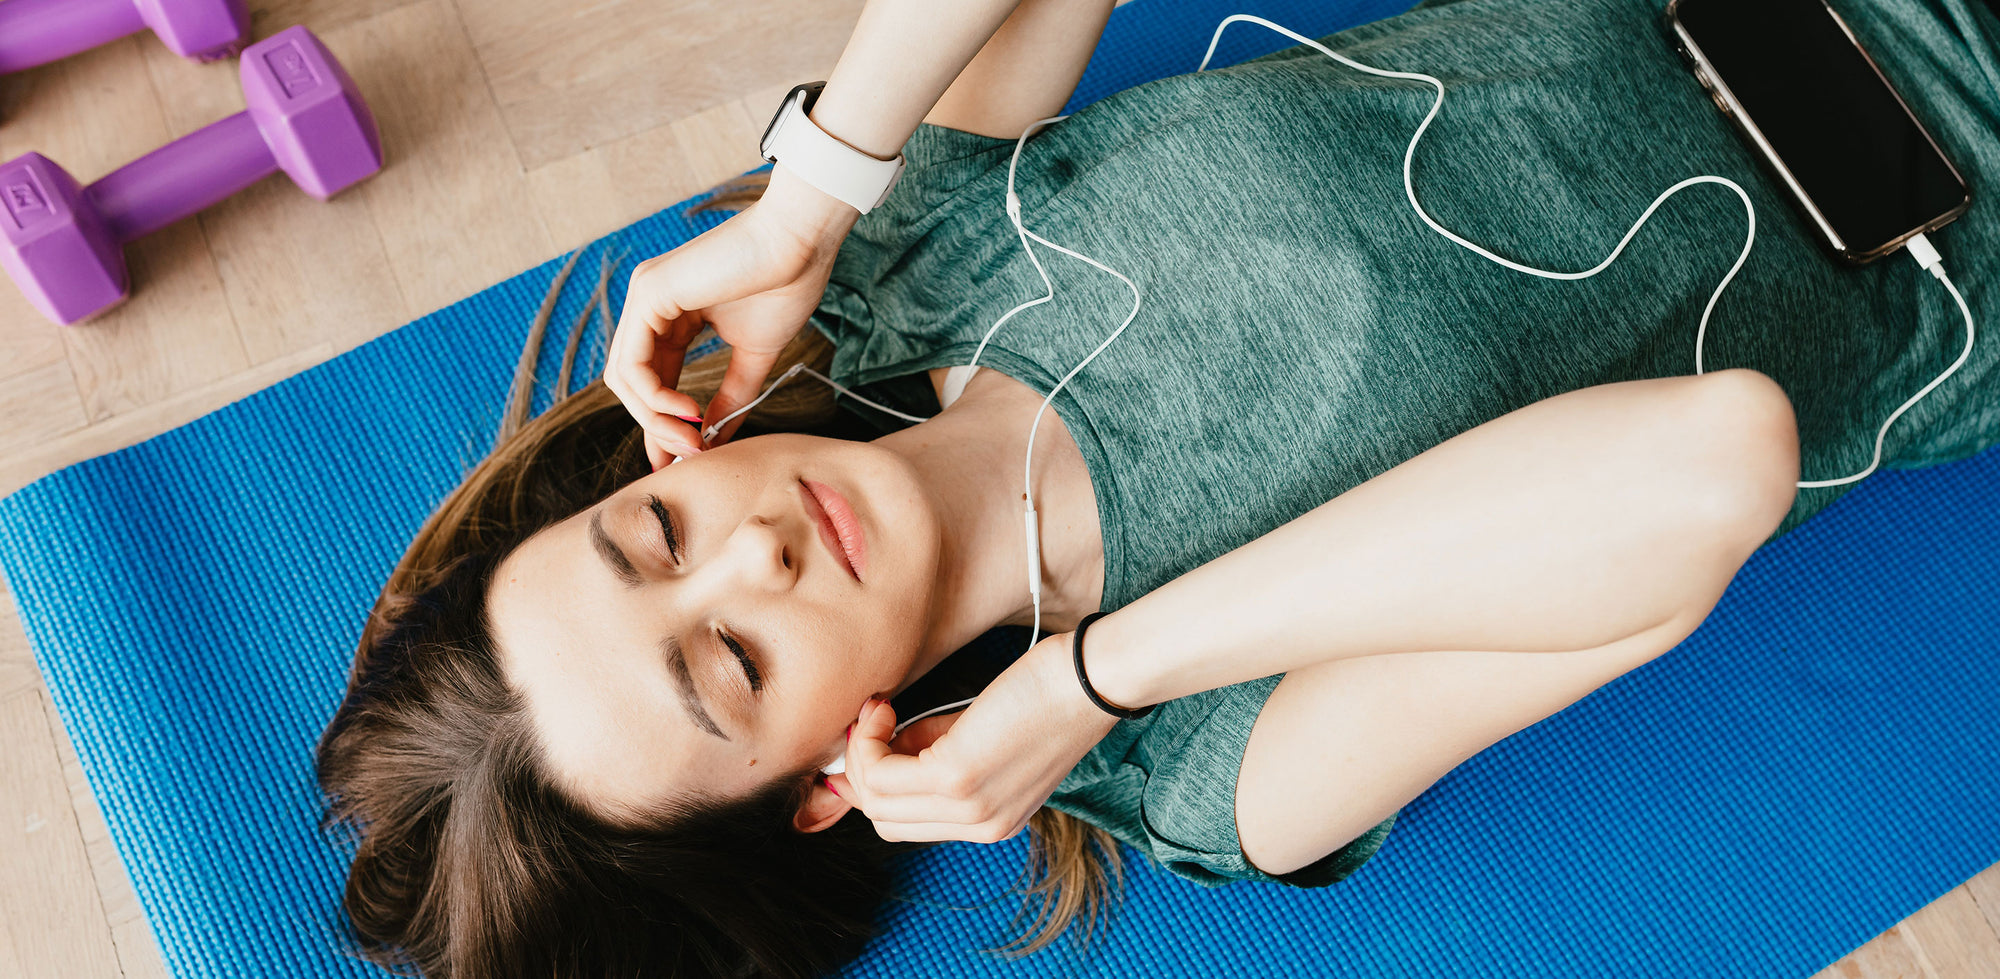 A woman laying on a yoga mat listening to music